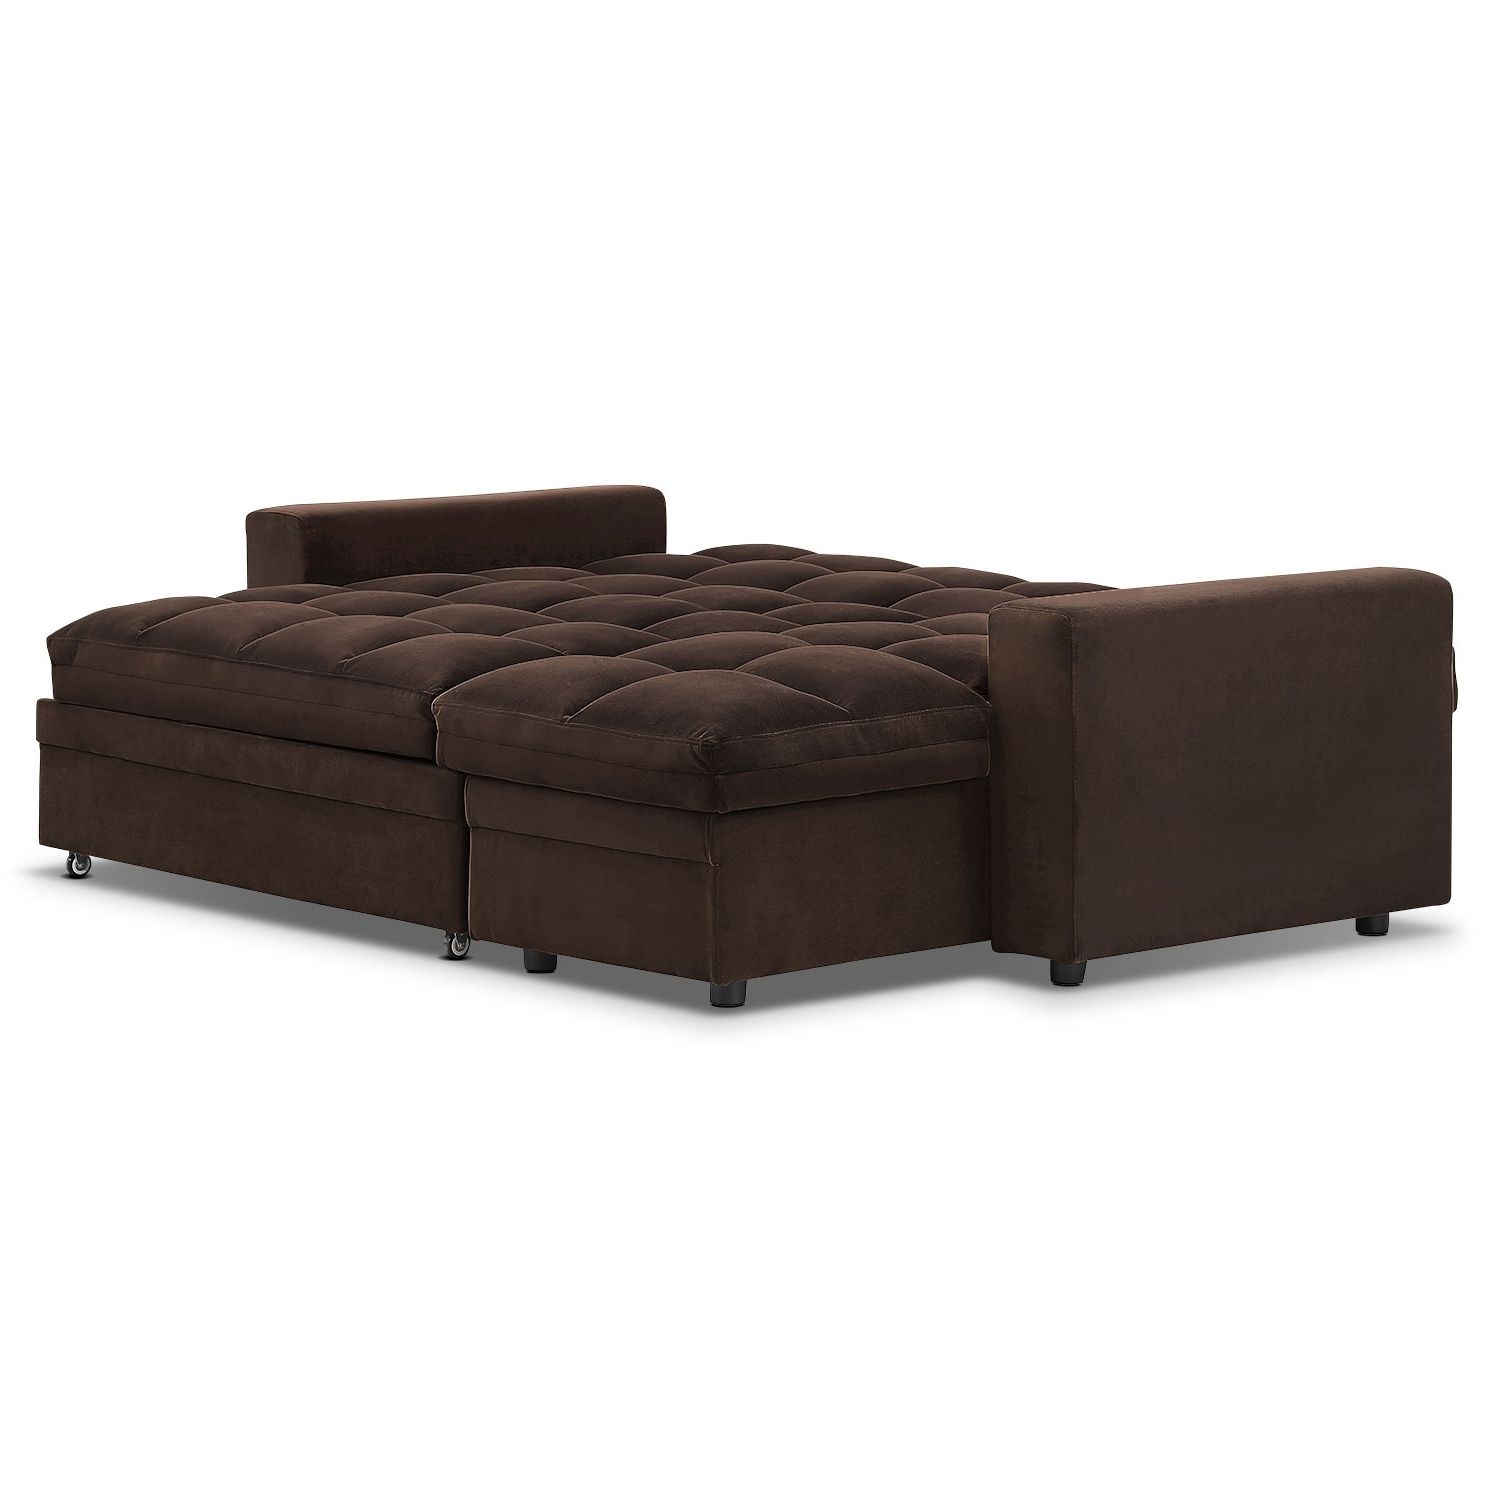 Value City Furniture Pertaining To Latest Chaise Lounge Sofa Beds (View 9 of 15)